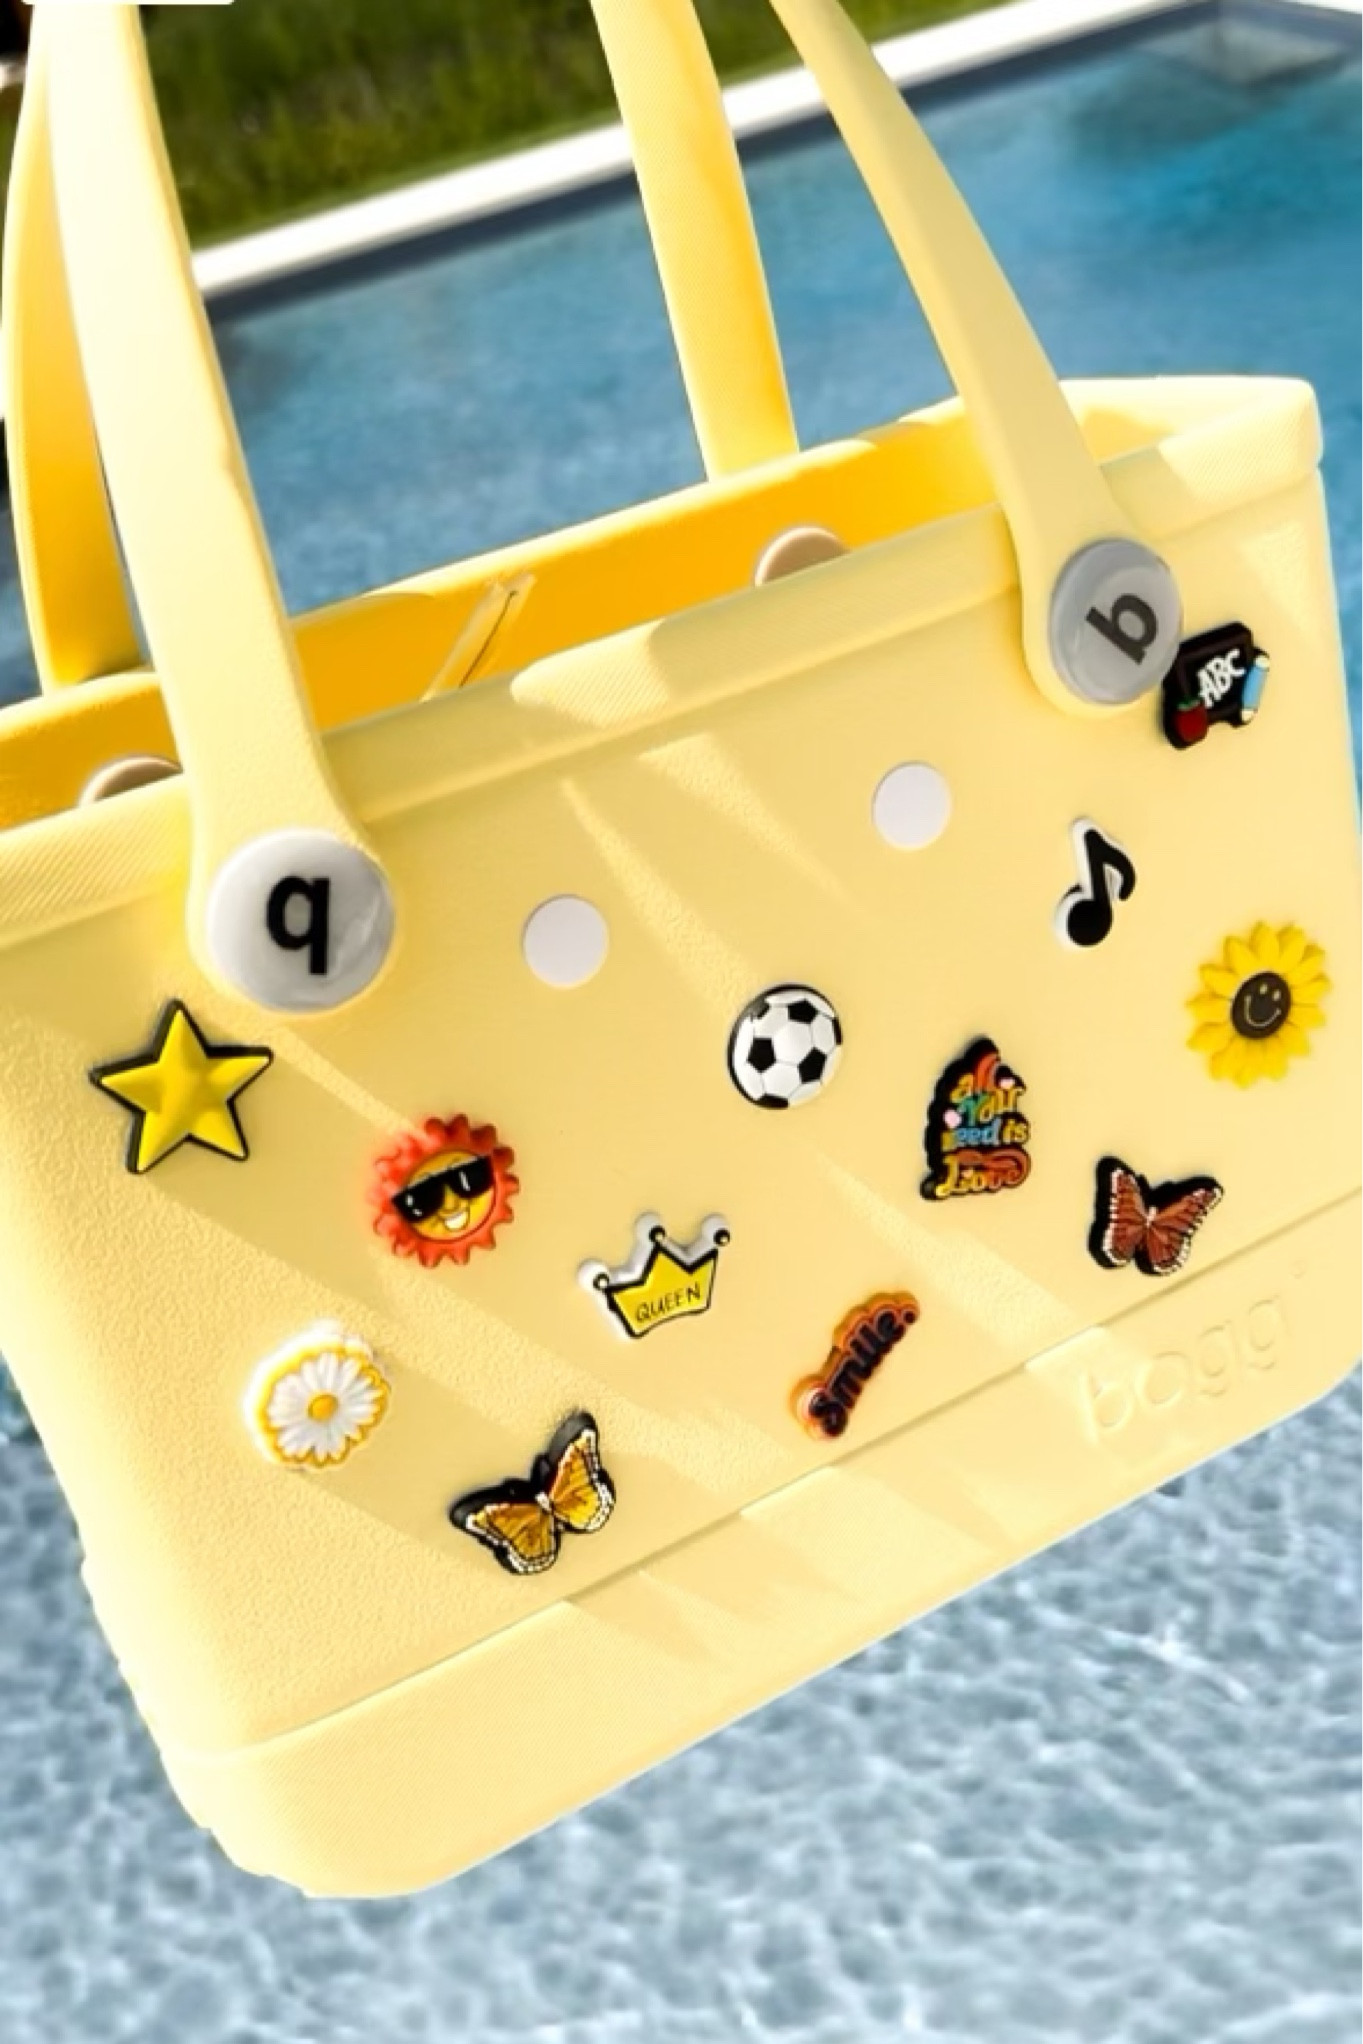 Bogg Bag Baby - YELLOW-there